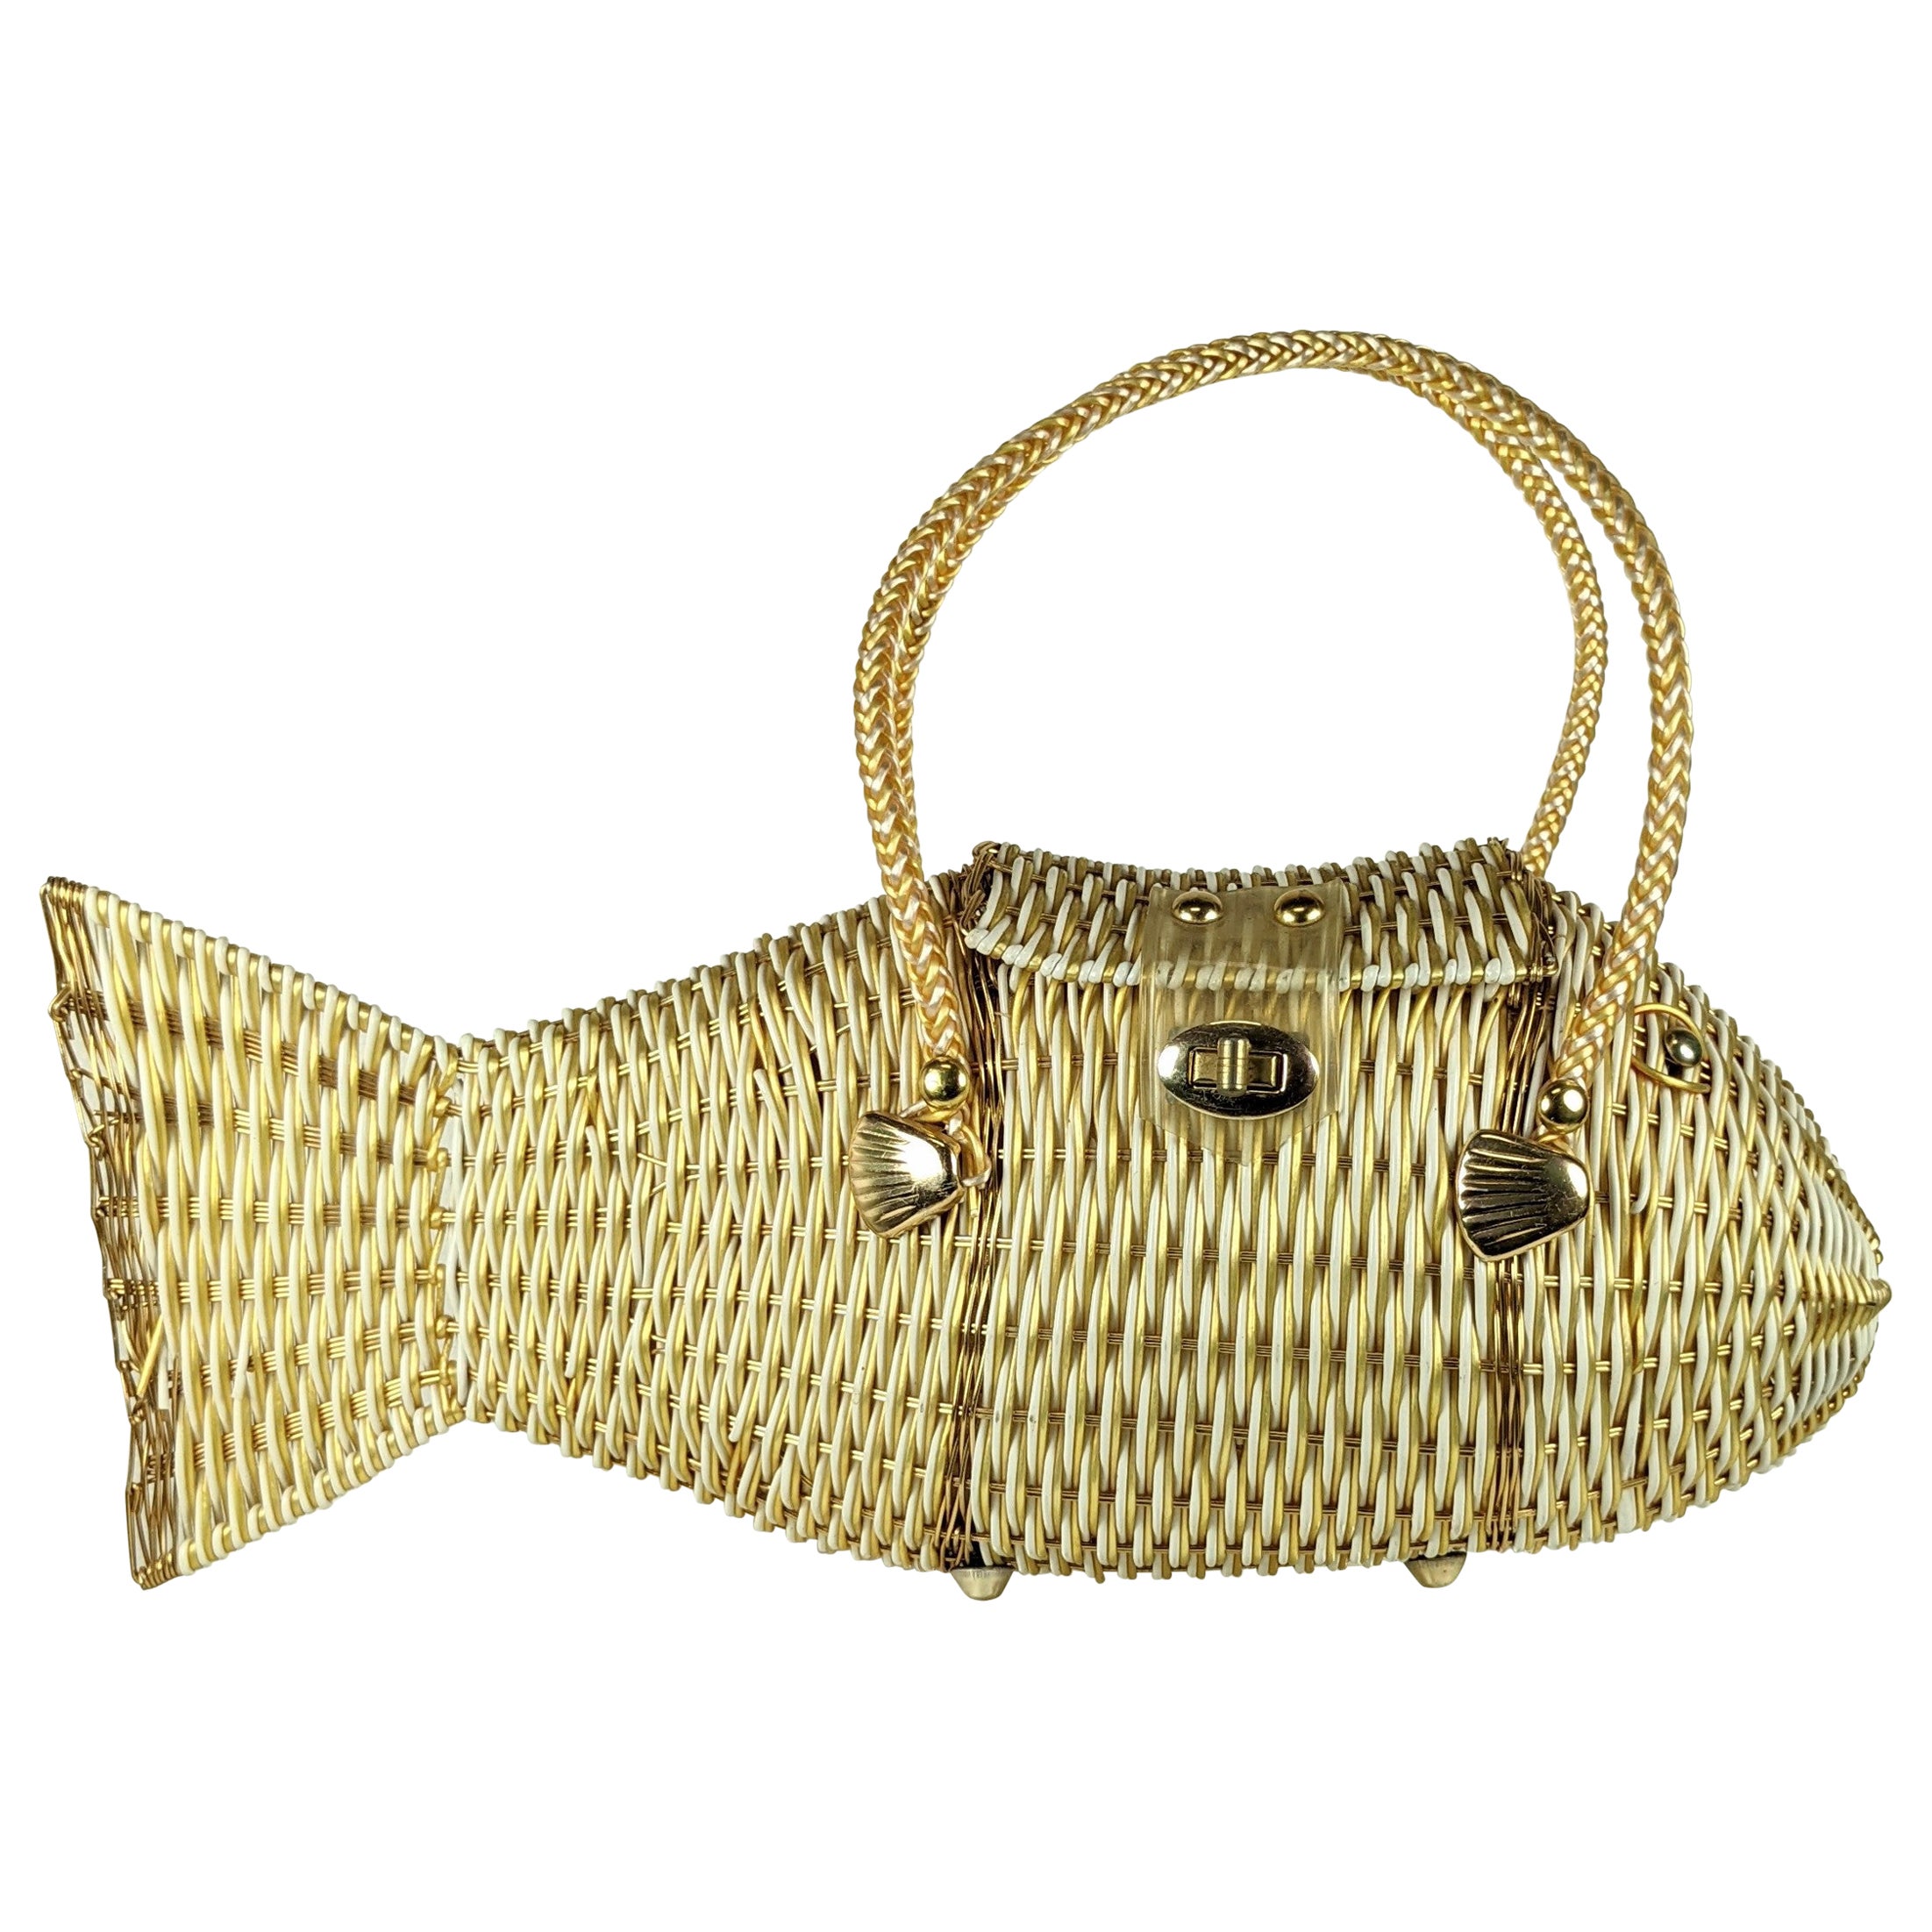 Charming 1960's Woven Figural Fish Bag For Sale